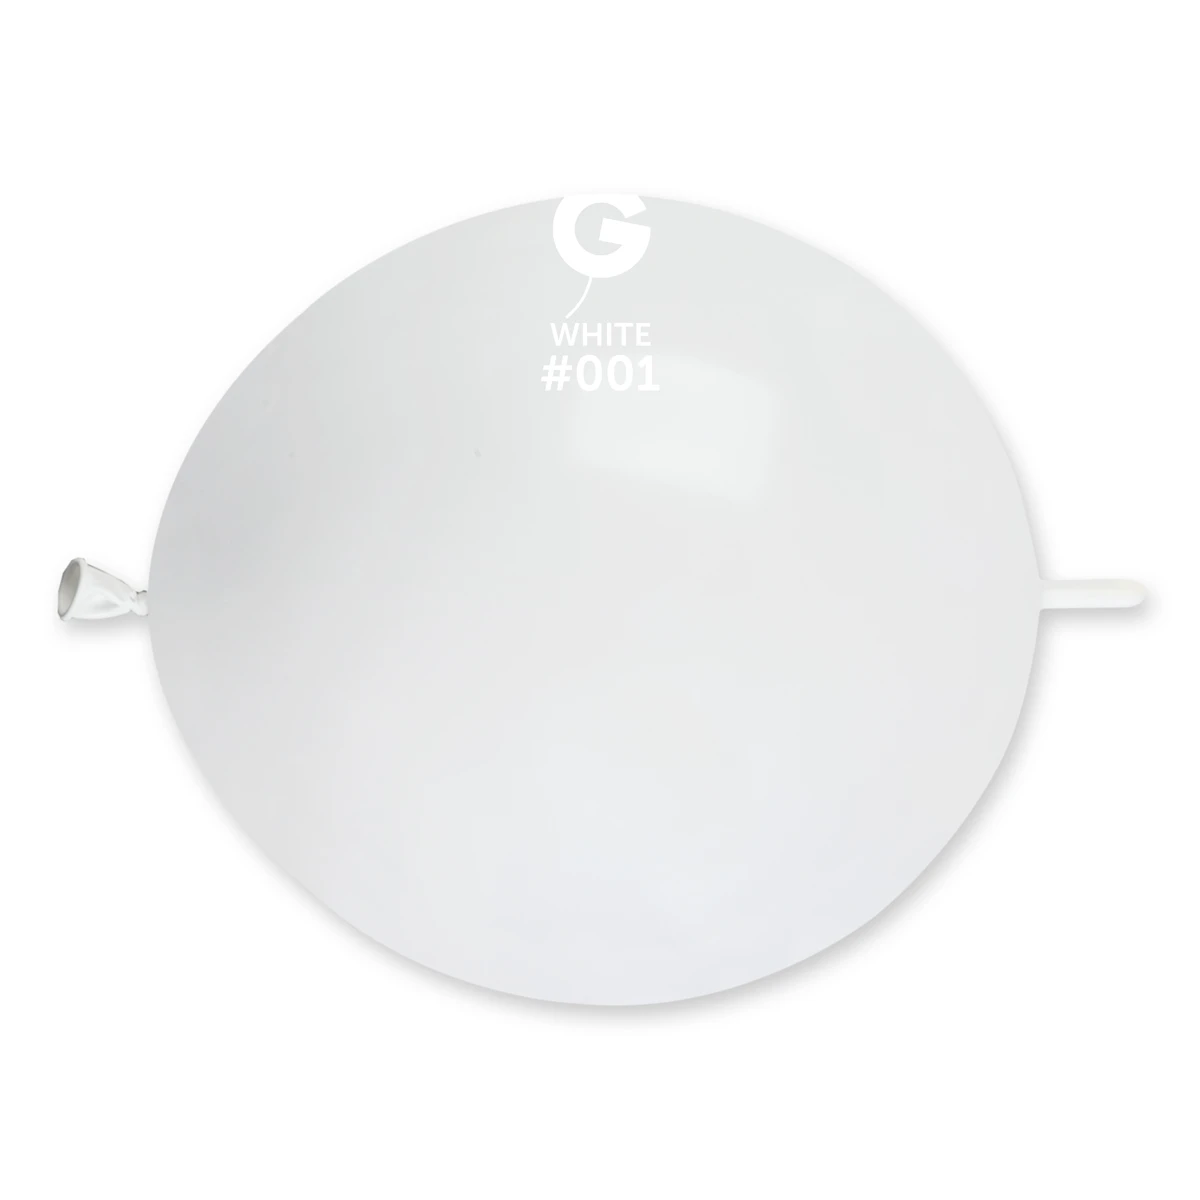 G-13” Link White Balloons #001 50ct